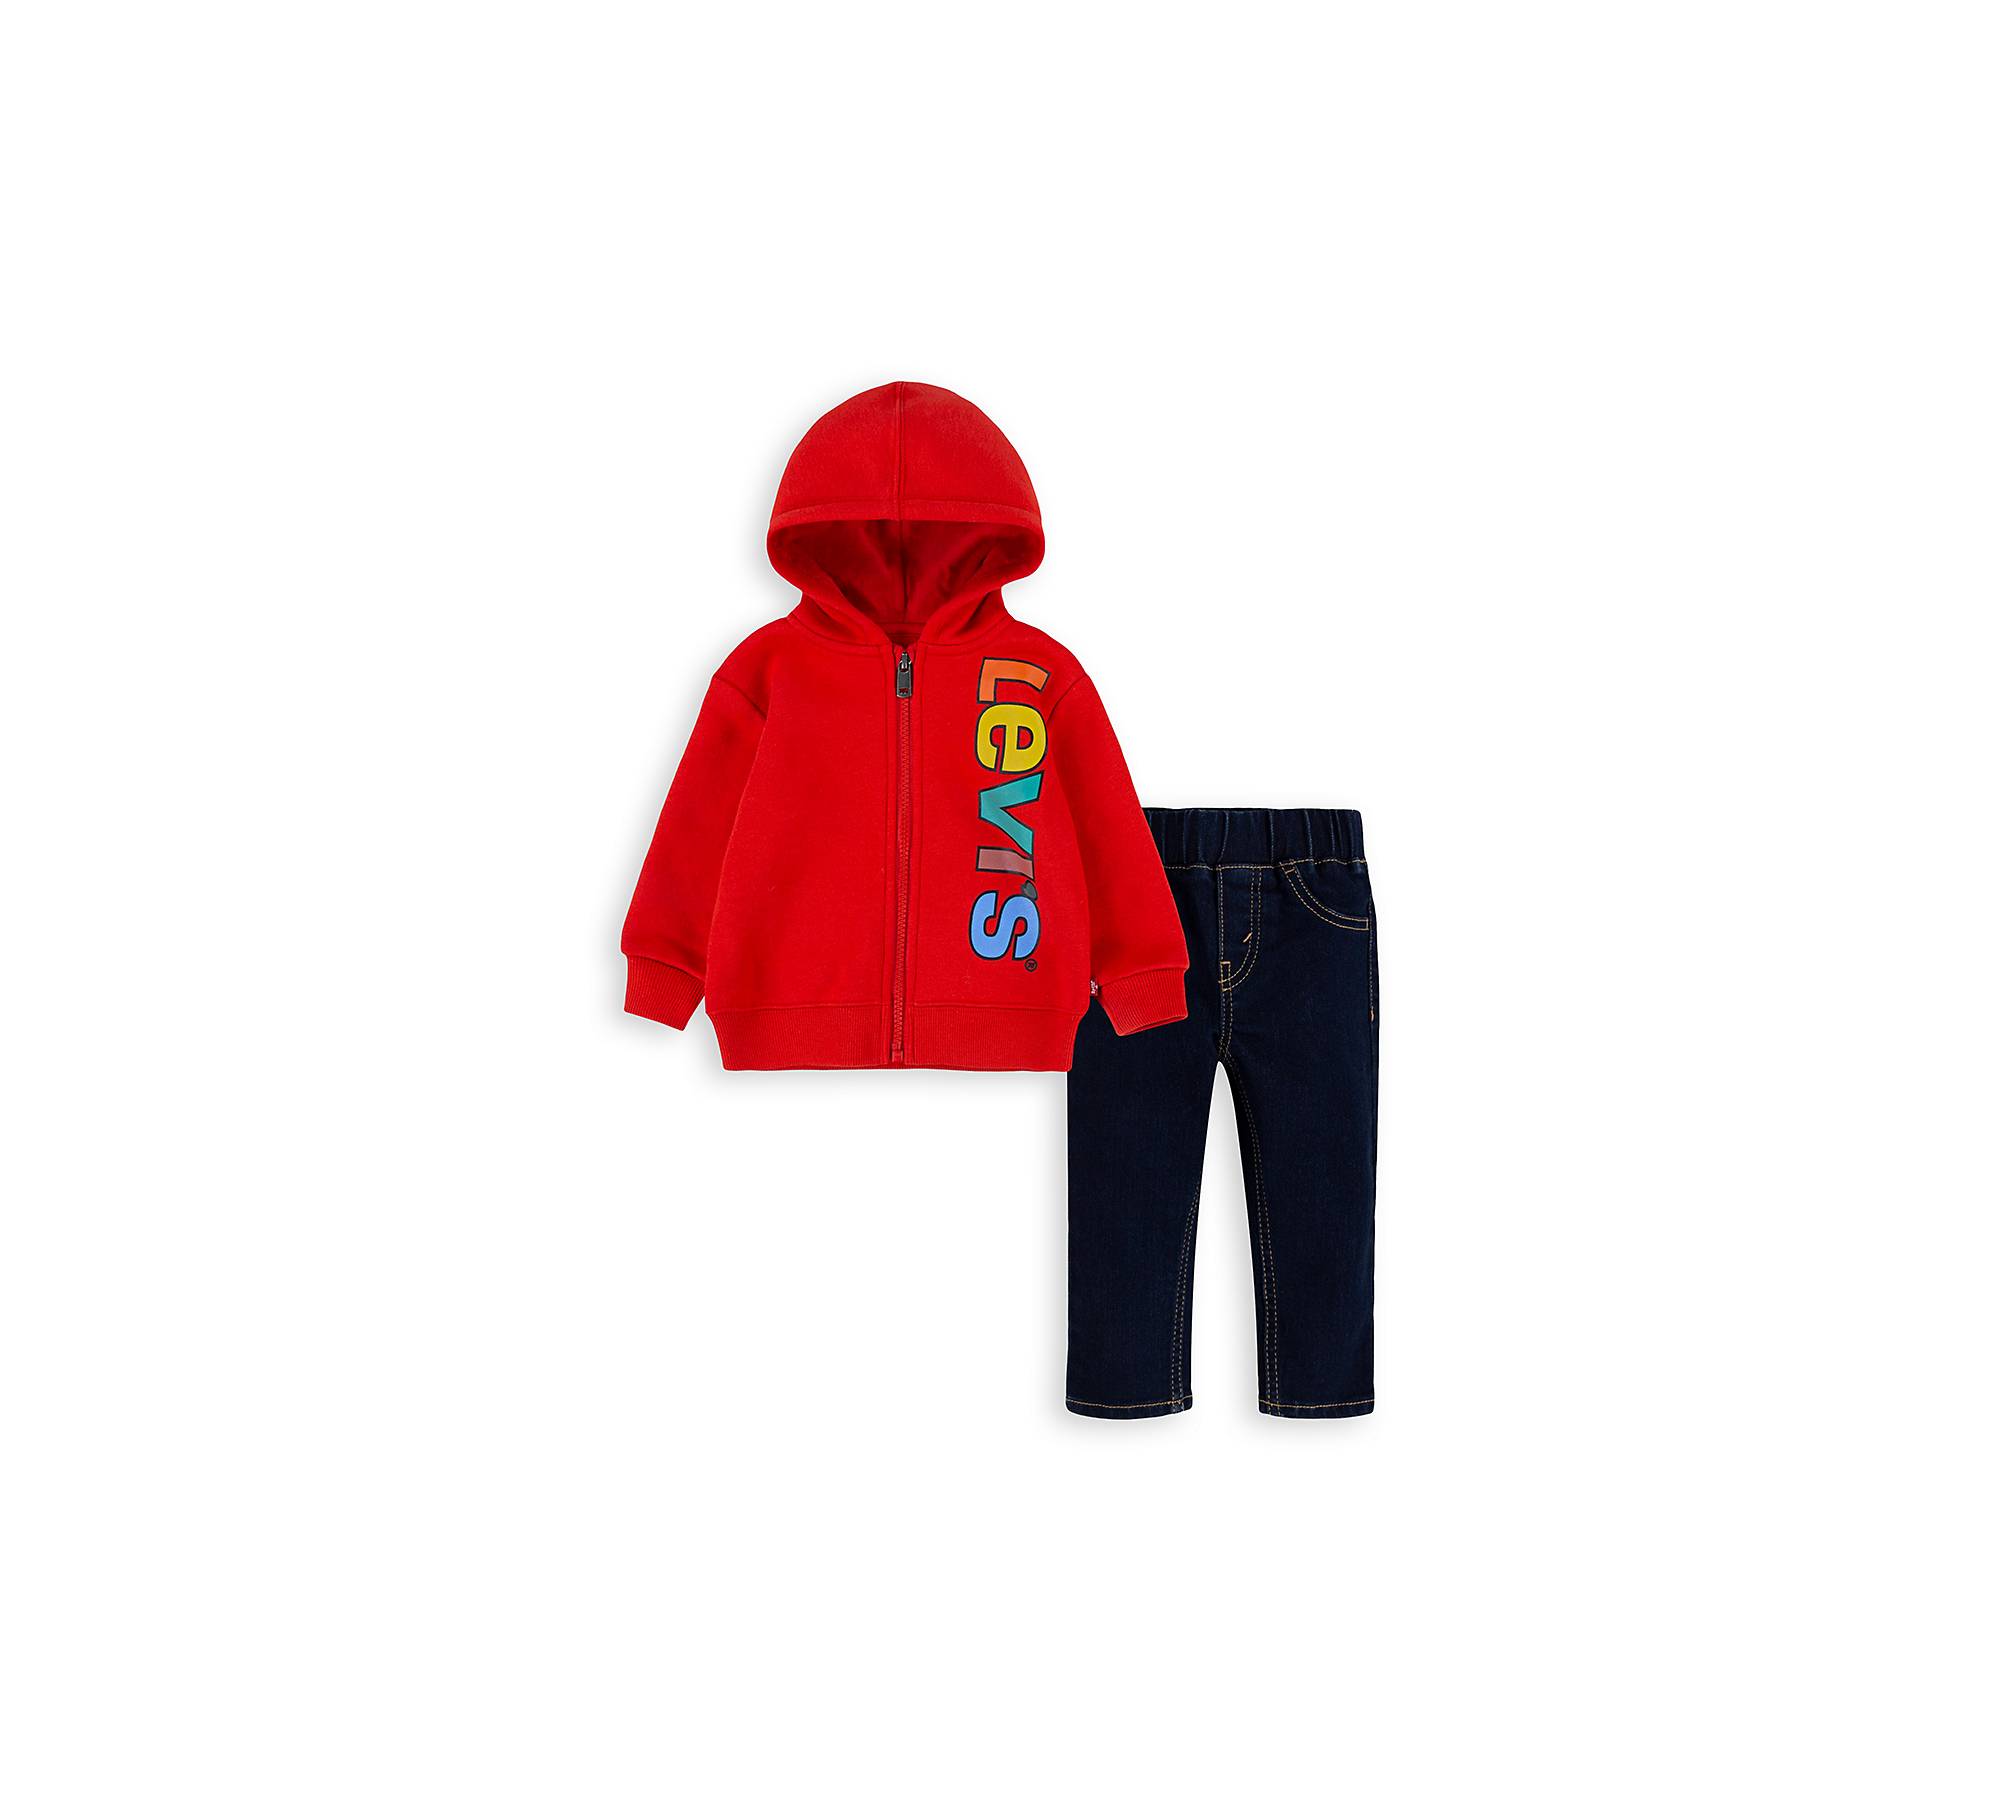 Toddler Boys Zip Hoodie And Jeans Set 2t-4t - Red | Levi's® US